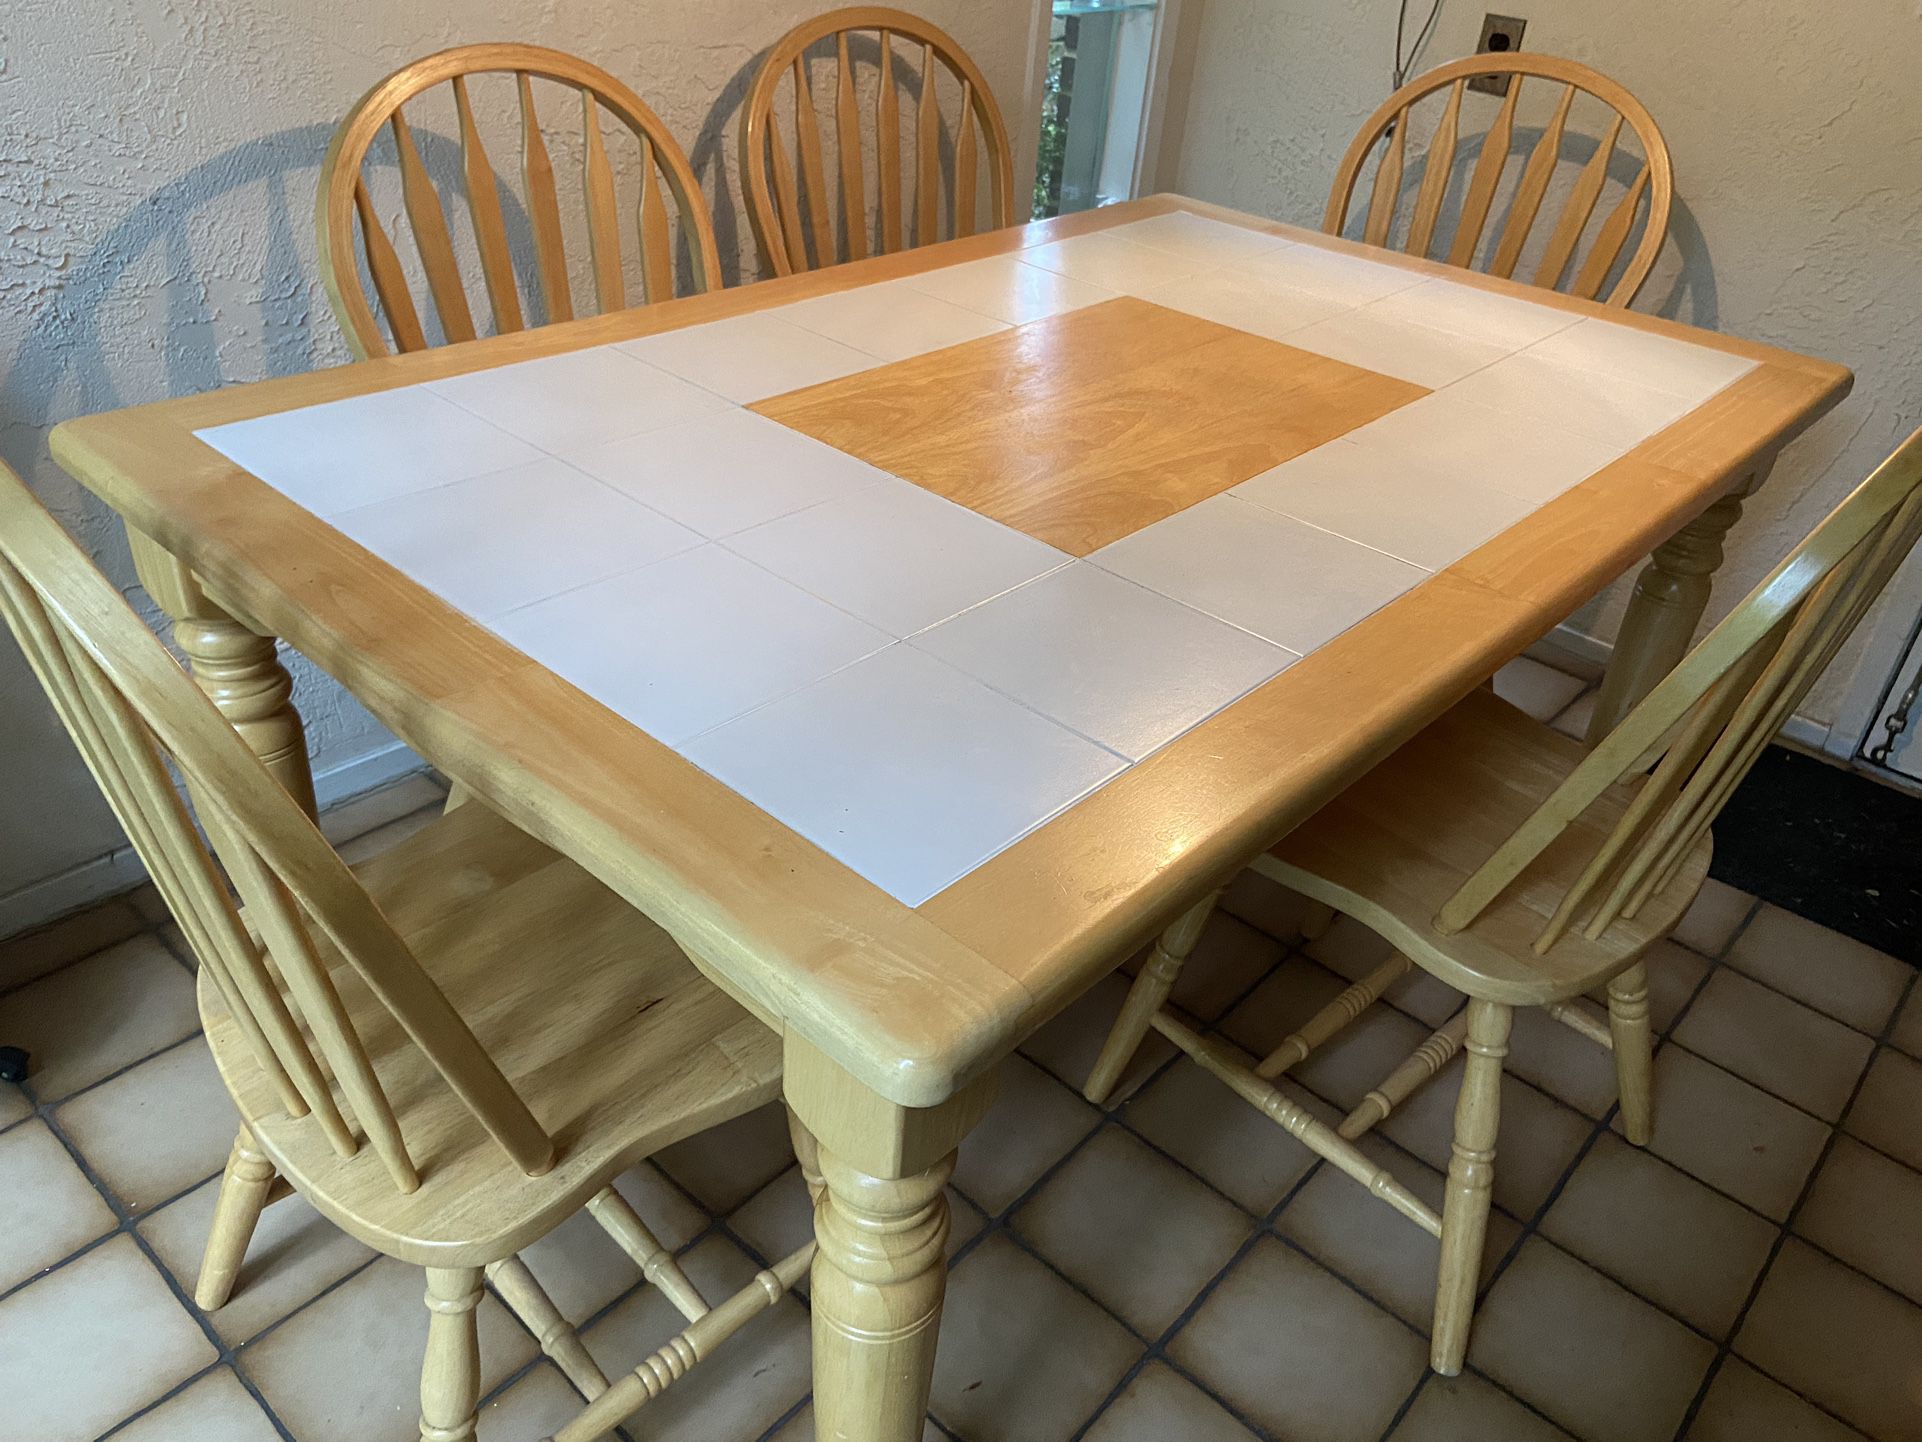 Wood/tile Dining Or Kitchen Room Table Like New Condition 